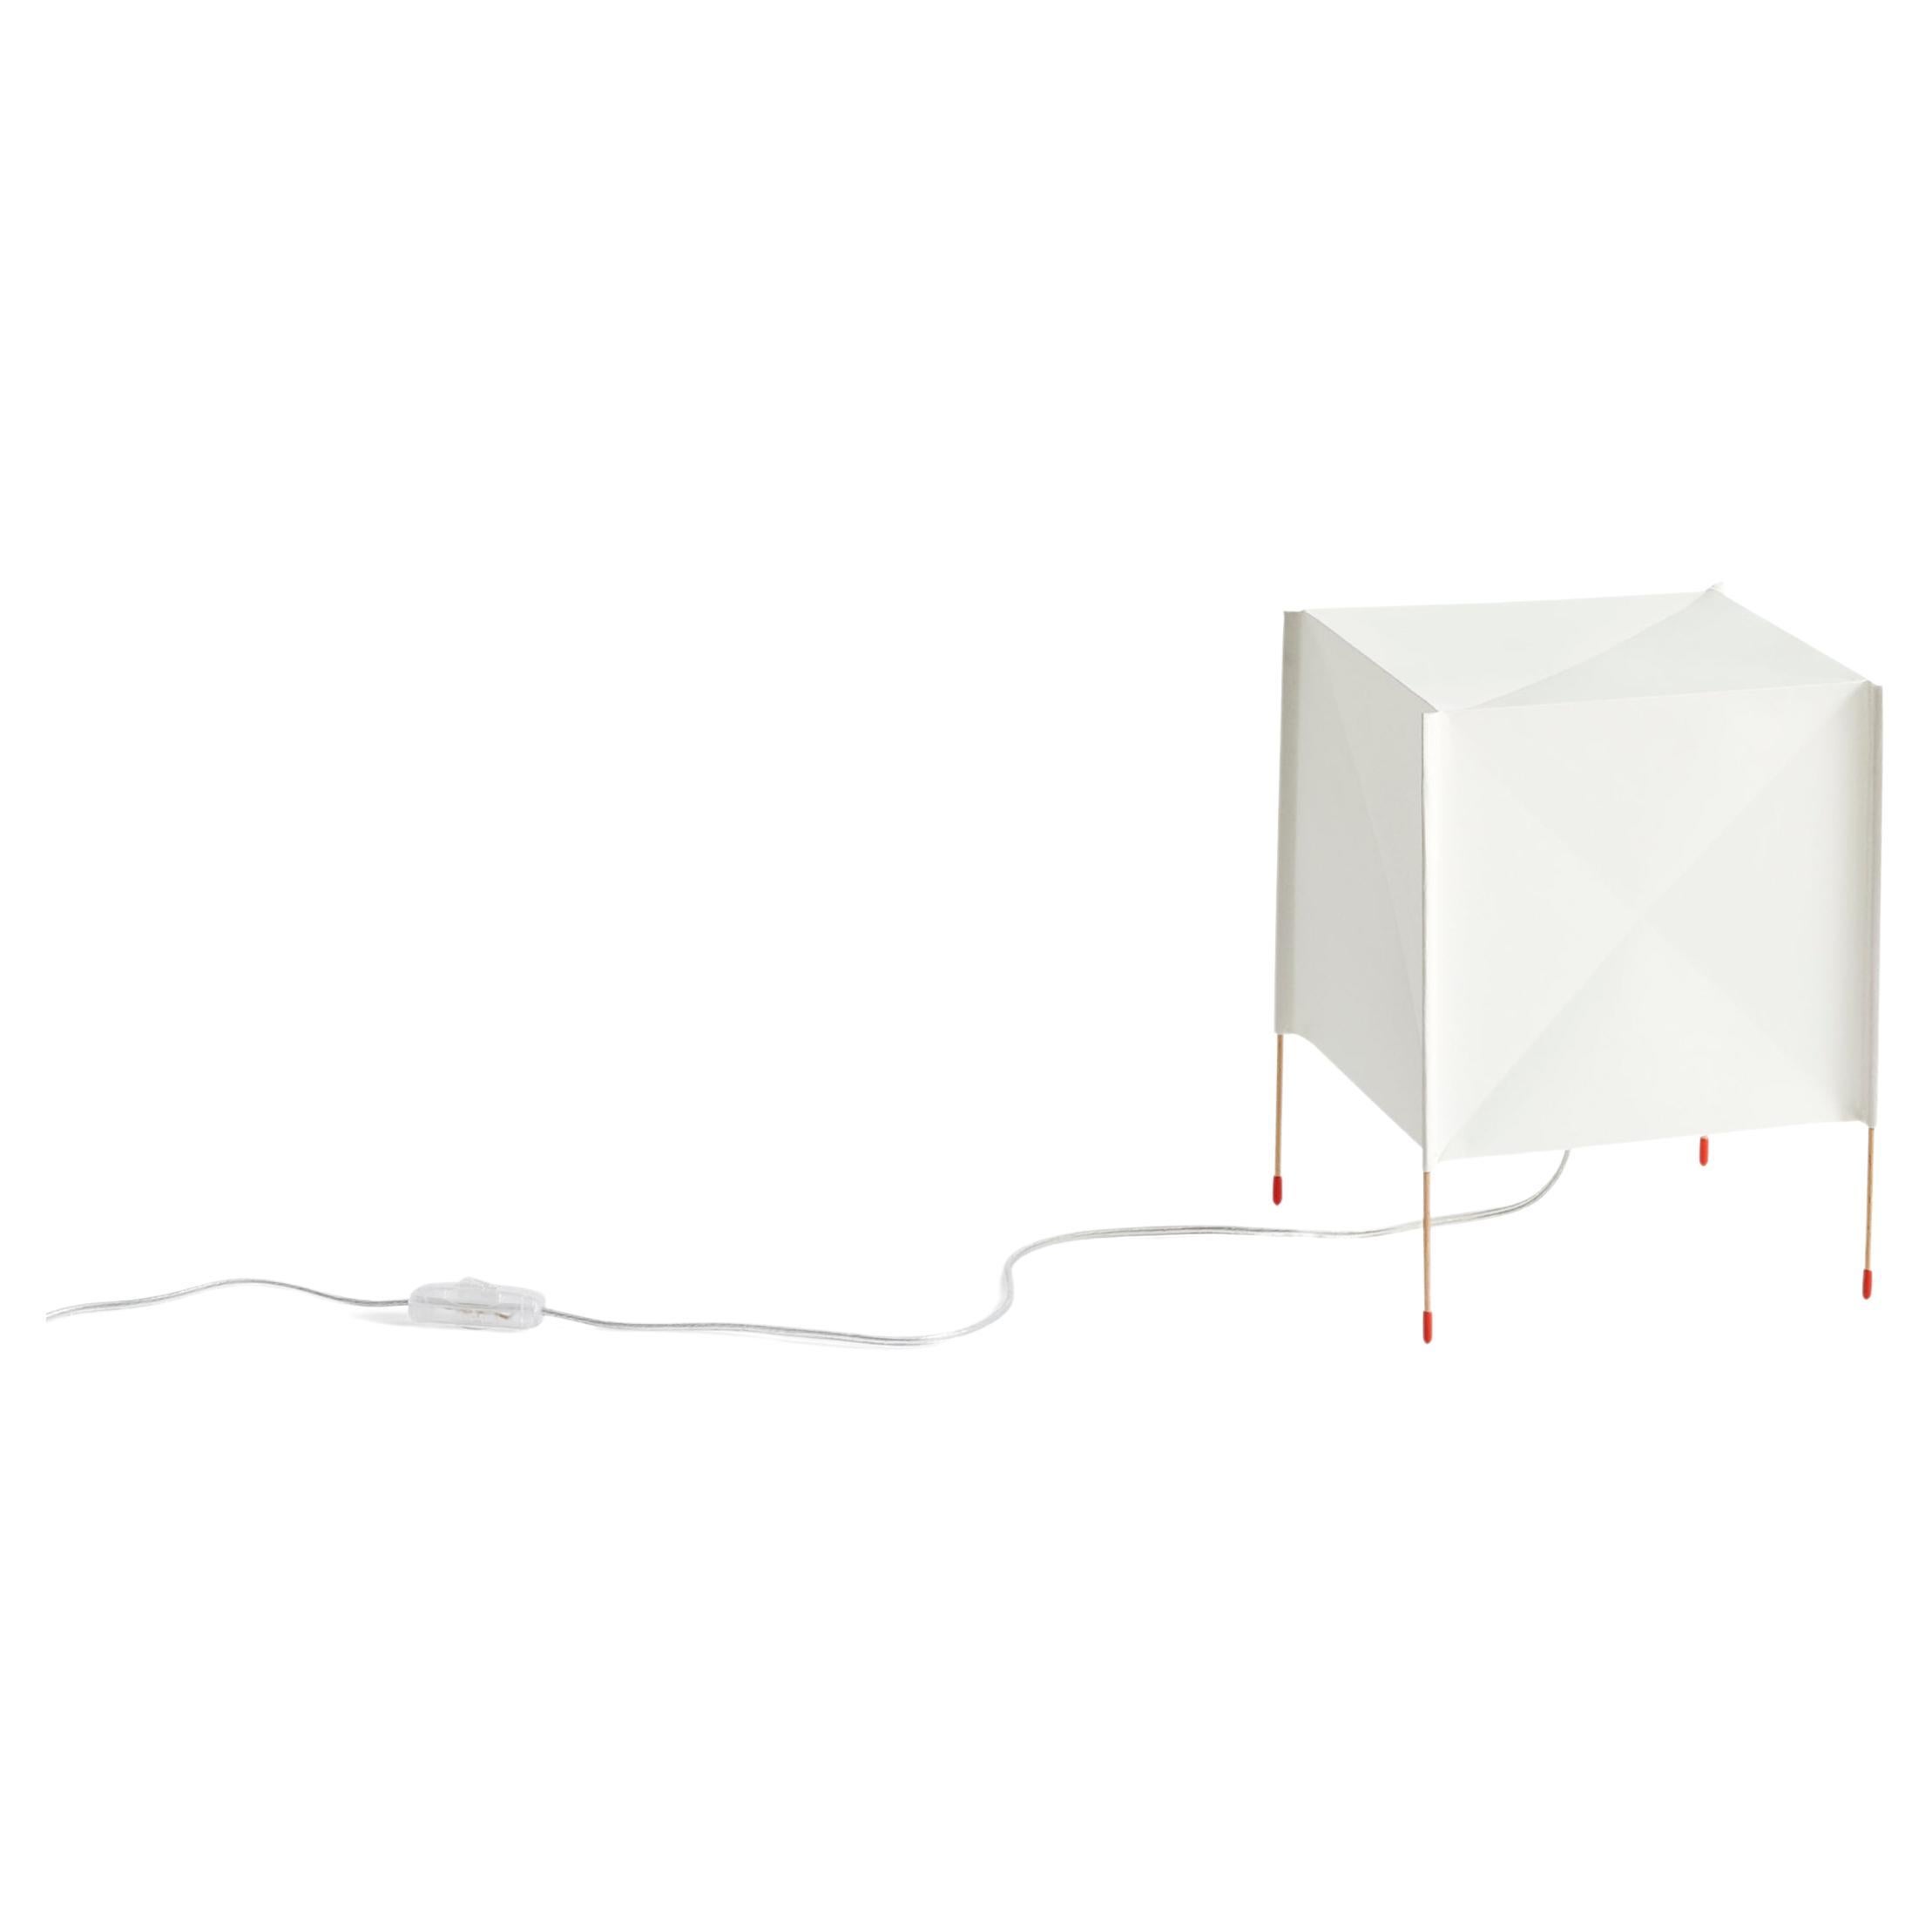 Paper Cube Table Lamp - Ecopet Paper - by Bertjan Pot for Hay